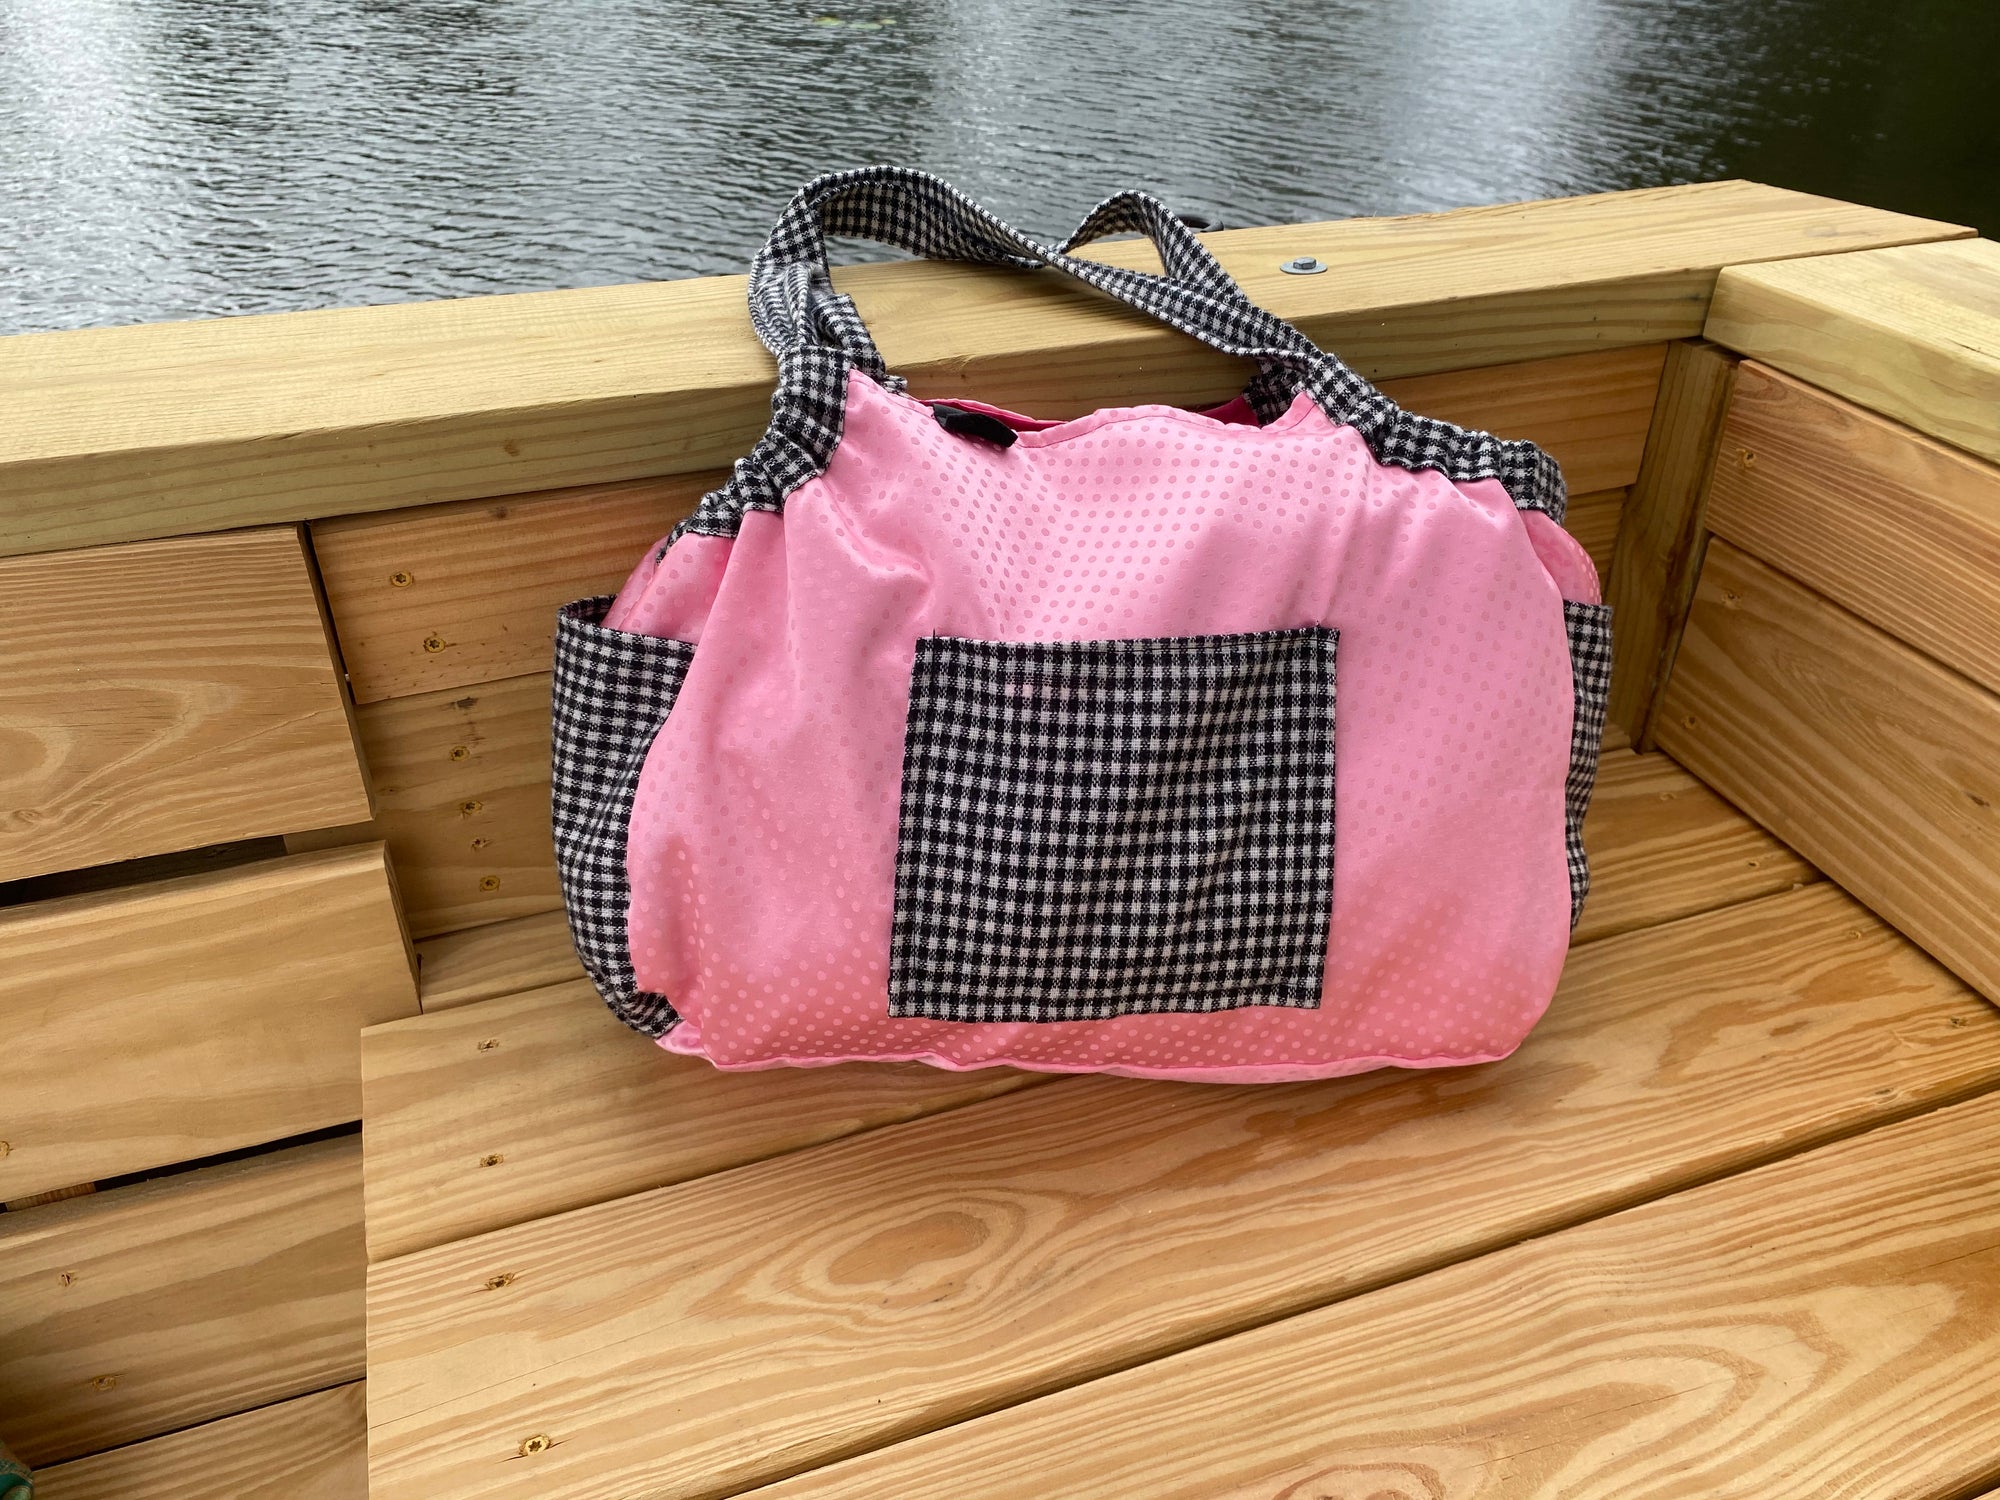 Samaki Bag - Pink Silk Polka Dot with Hot Pink Silk Inside and Pink and Black Check Accents